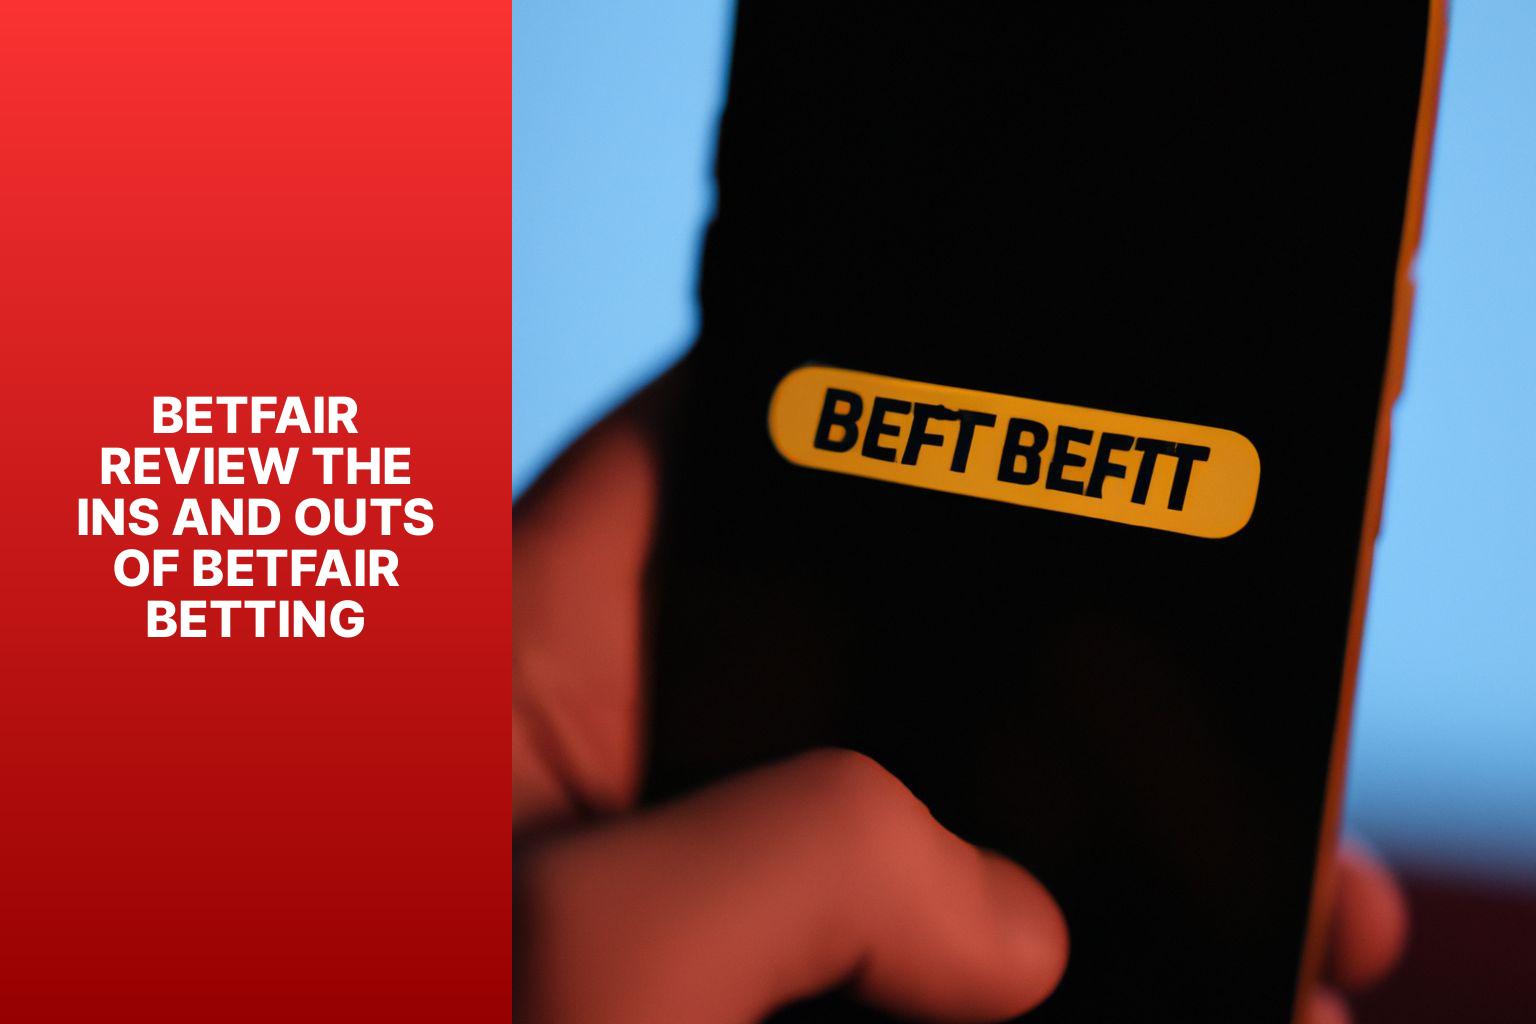 Betfair Review The Ins and Outs of Betfair Betting